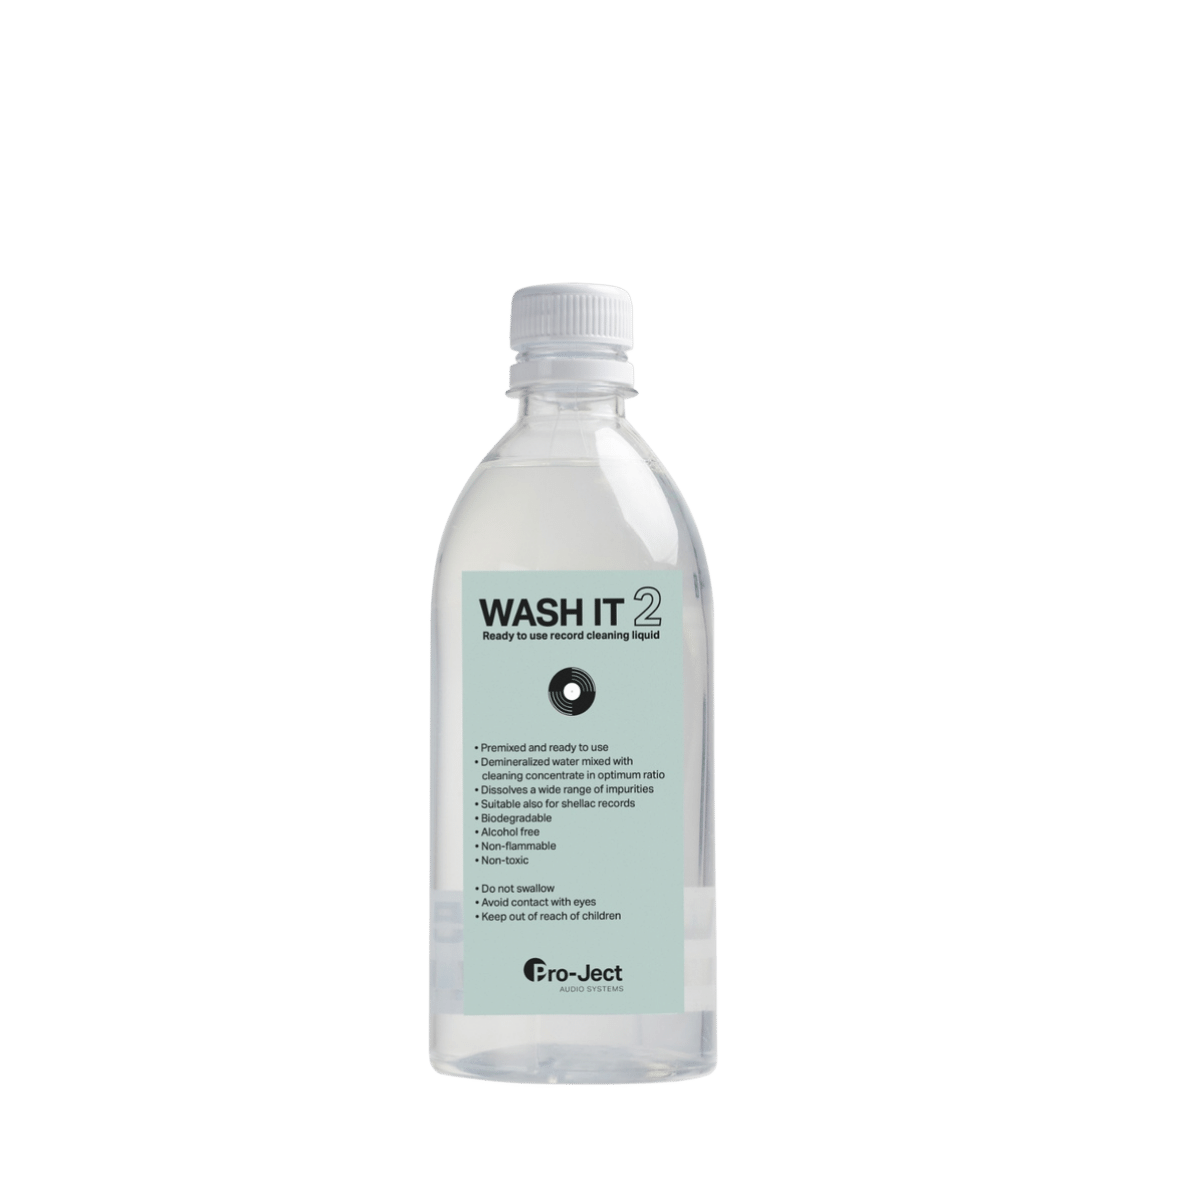 Pro-Ject Wash It 2 Eco-friendly Cleaning Concentrate for VC